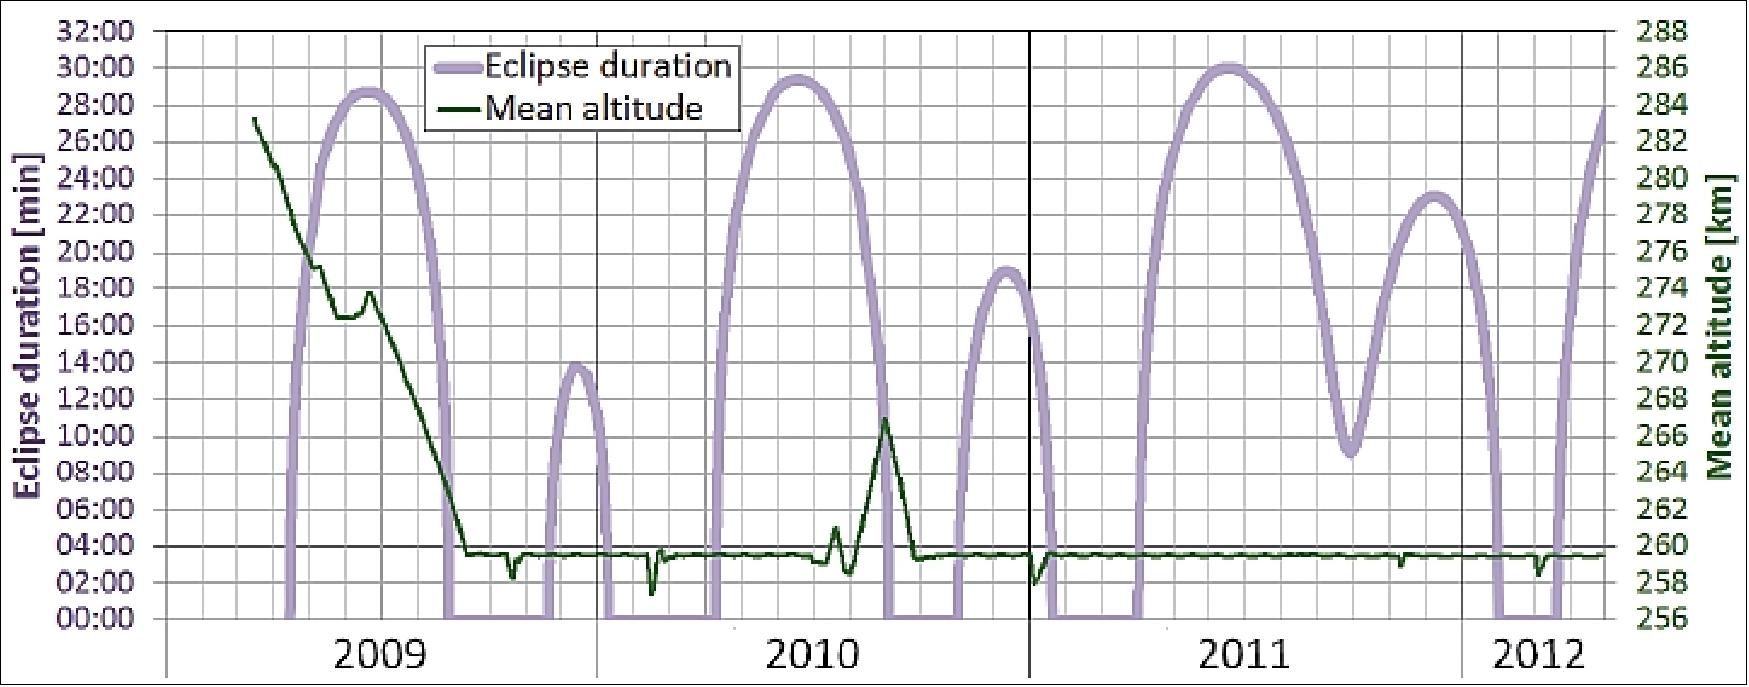 Figure 18: Altitude and eclipse pattern from launch up to 2012 (image credit: ESA)